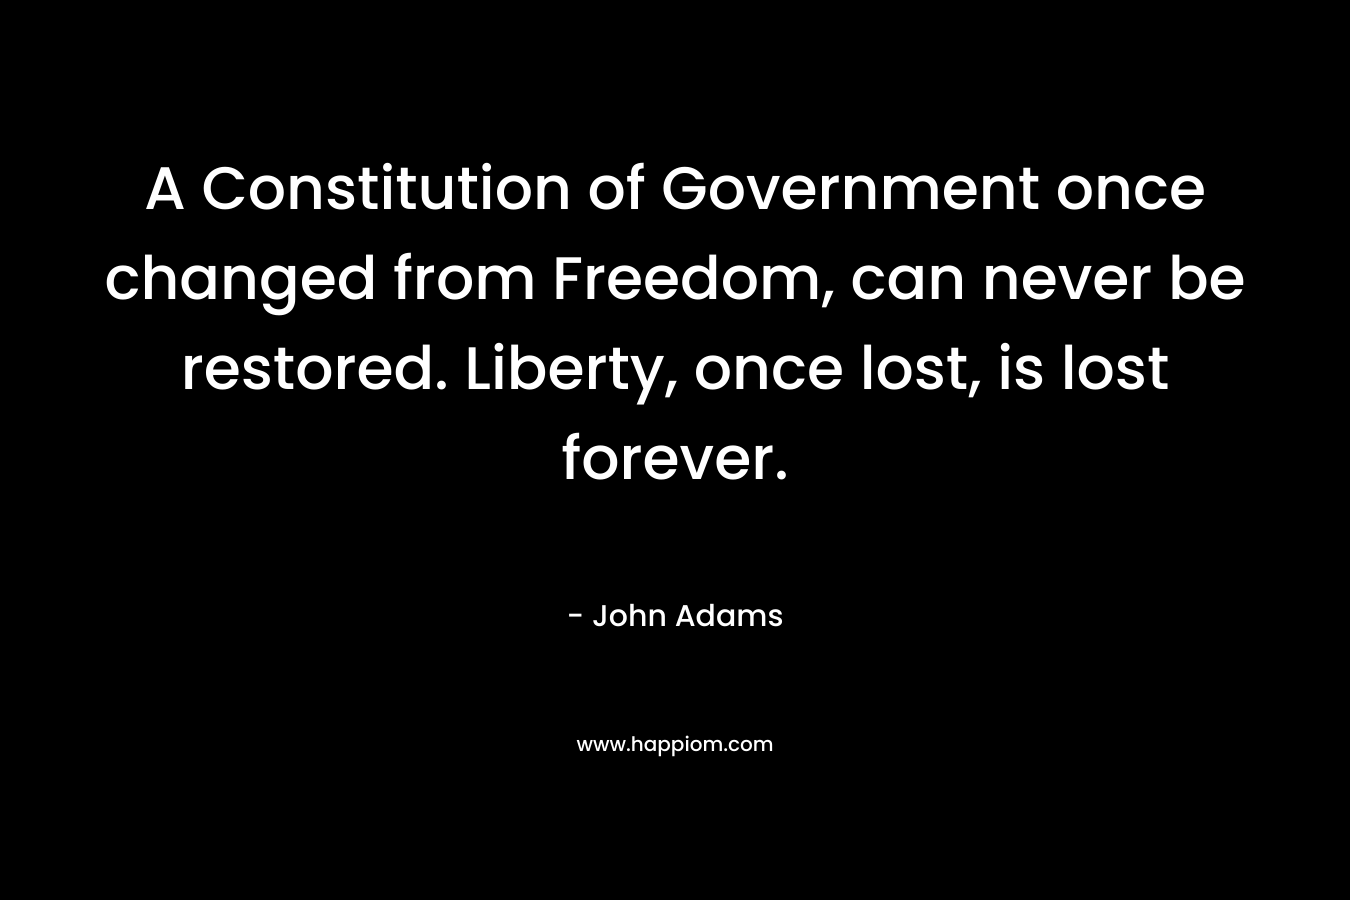 A Constitution of Government once changed from Freedom, can never be restored. Liberty, once lost, is lost forever.